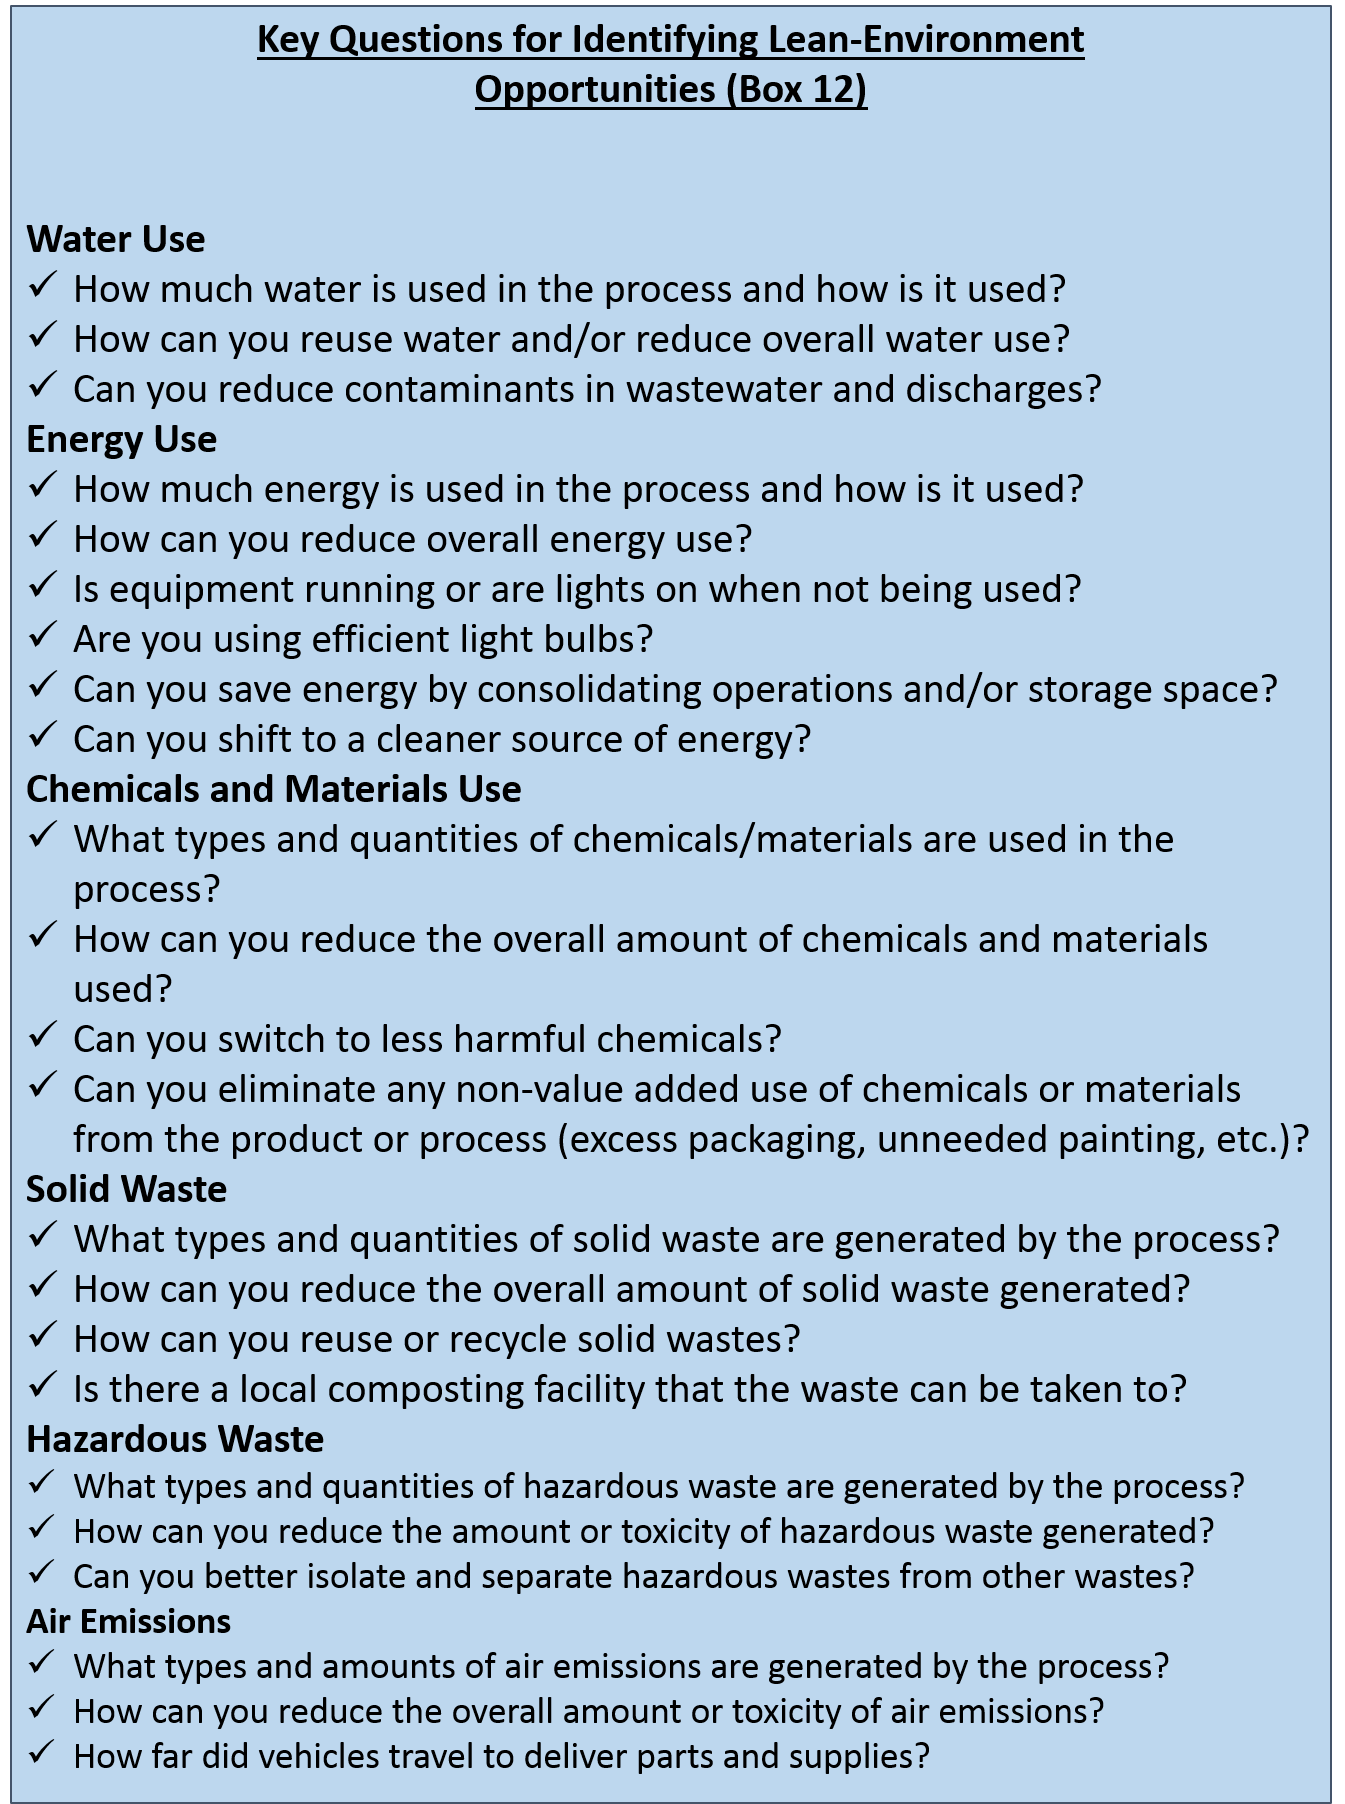 Key Questions for Identifying Lean-Environment Opportunities (Box 12)